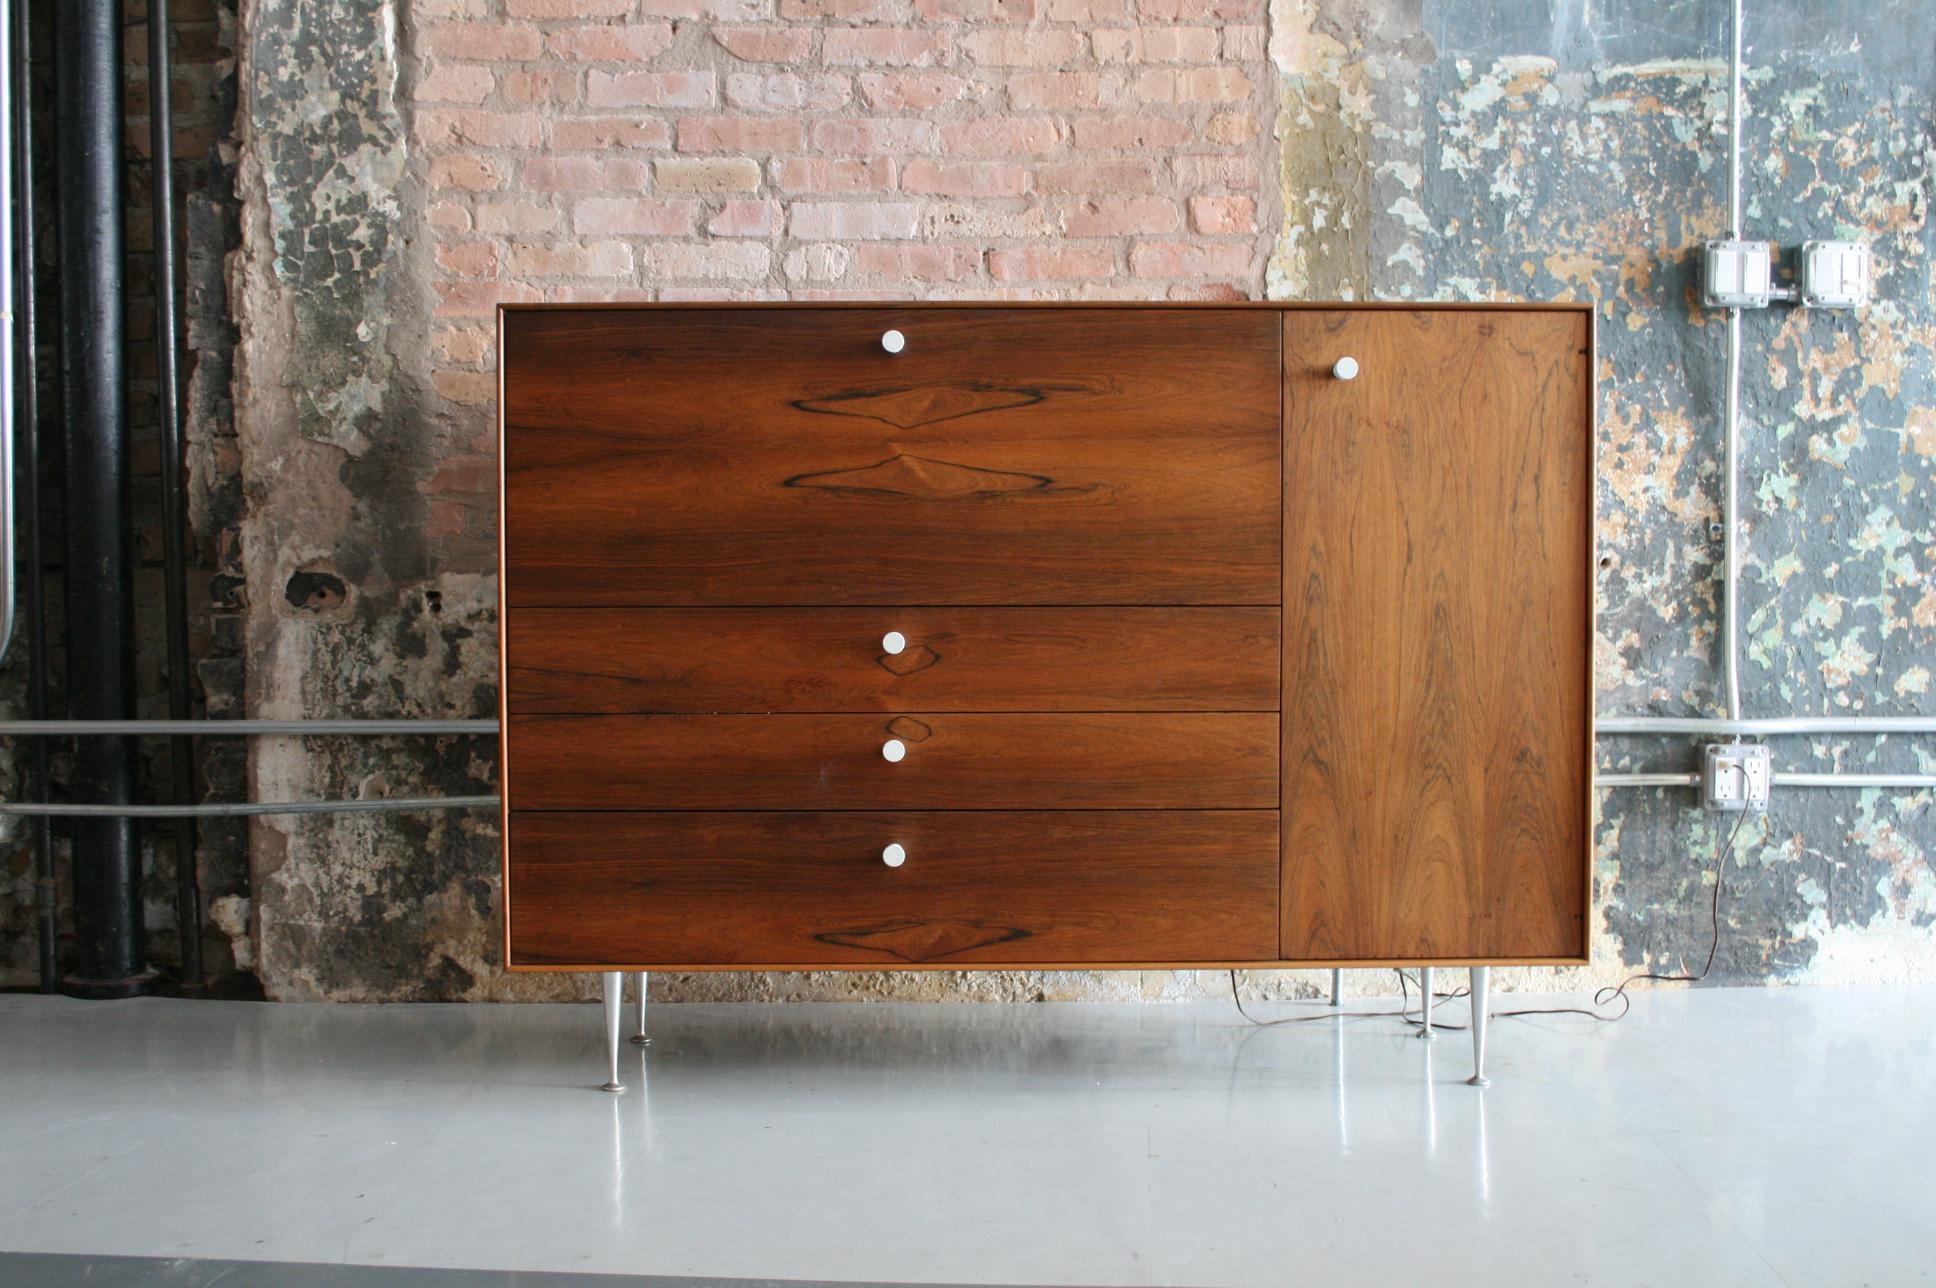 This is a Thin Edge Series secretary cabinet / desk designed by George Nelson for Herman Miller. Named for its clean lines, the minimal Rosewood case floats on aluminum champagne flute legs and finished with Nelson's signature porcelain knobs. Panel